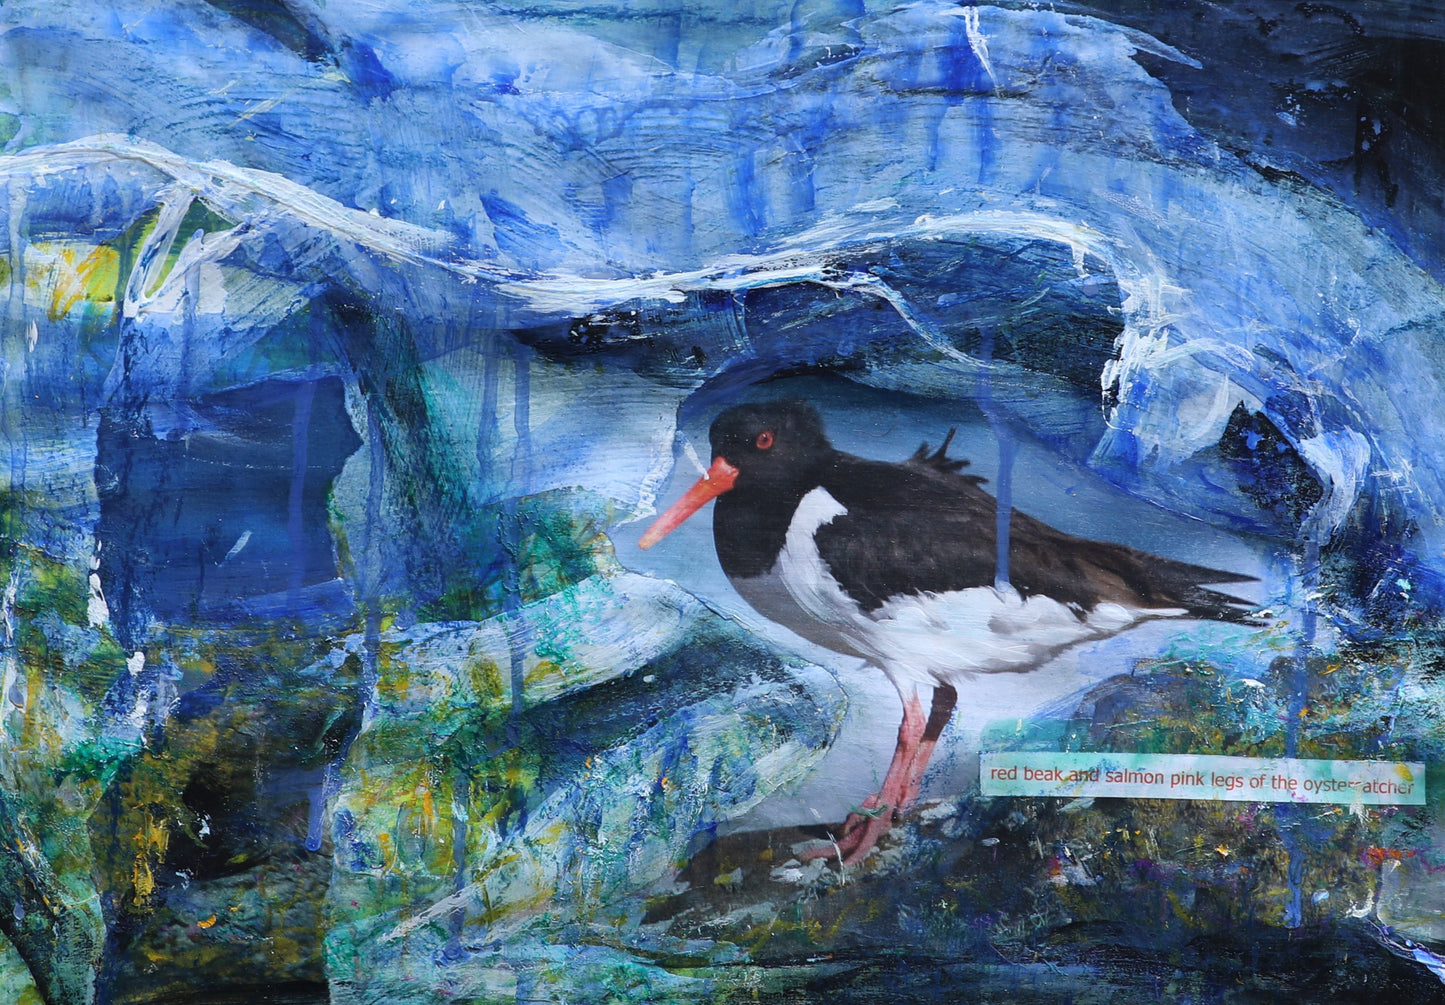 Original painting framed/Red beaks and salmon pink legs of the oystercatcher